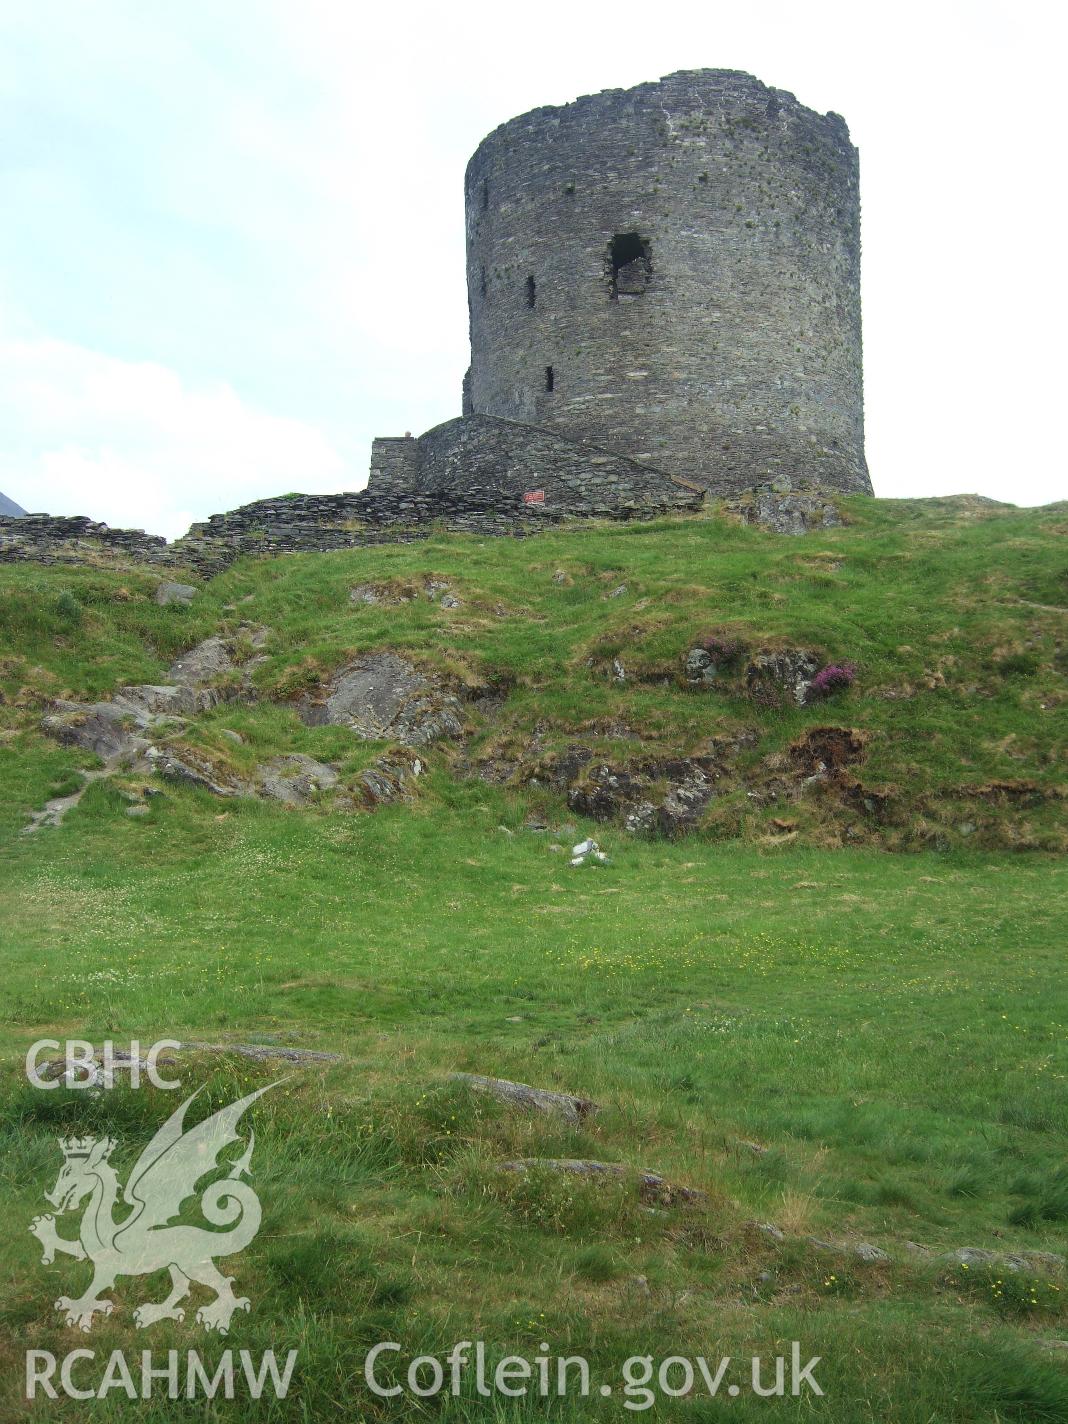 View of Dolbadarn Castle from the west, taken by A.P.Wakelin on 25 June 2009.